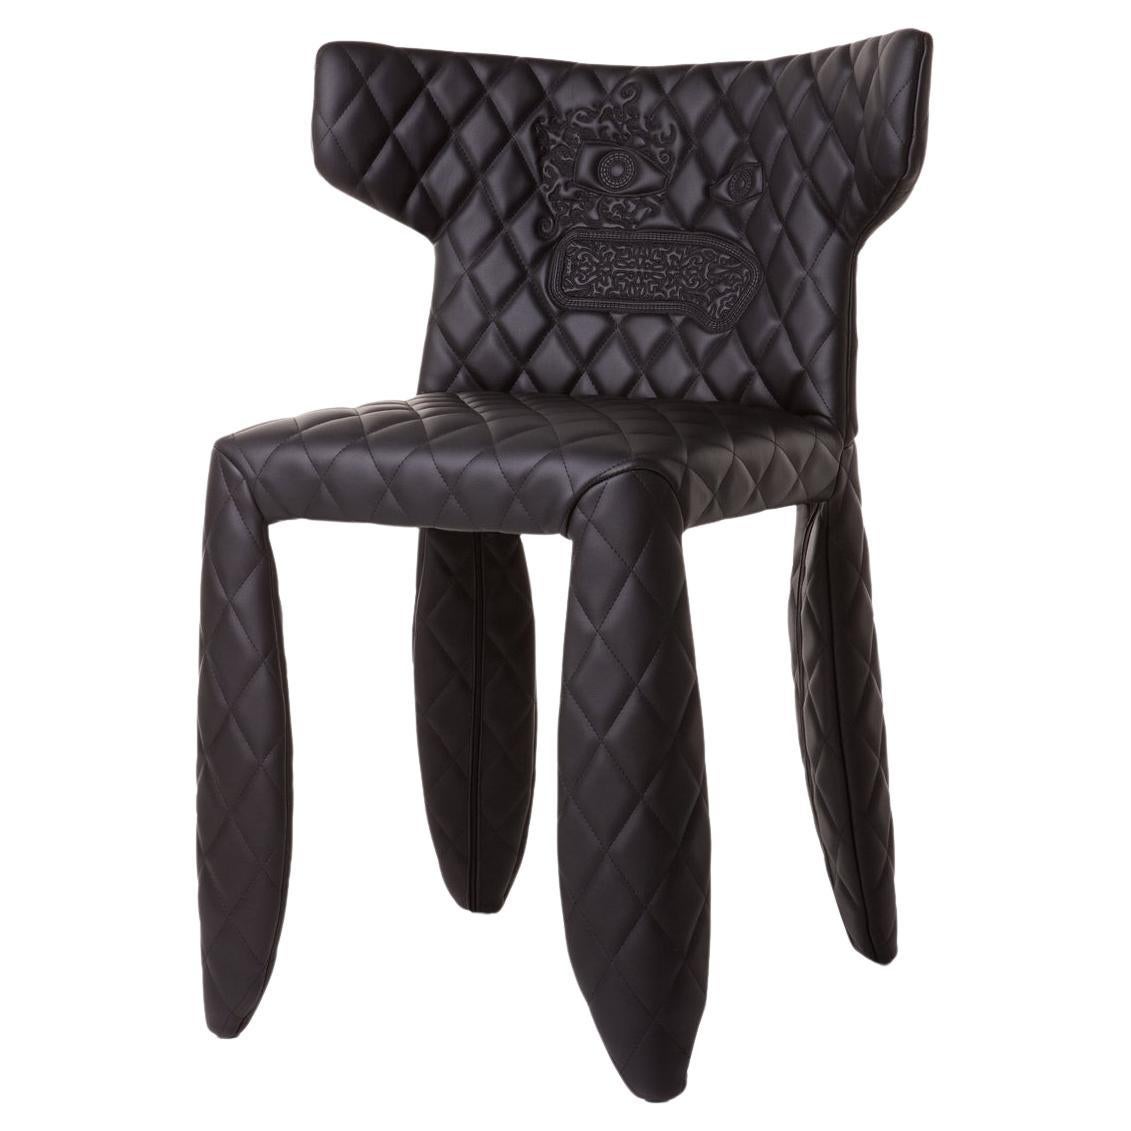 Moooi Monster Diamond Chair with Arms in Black with Embroidery Upholstery